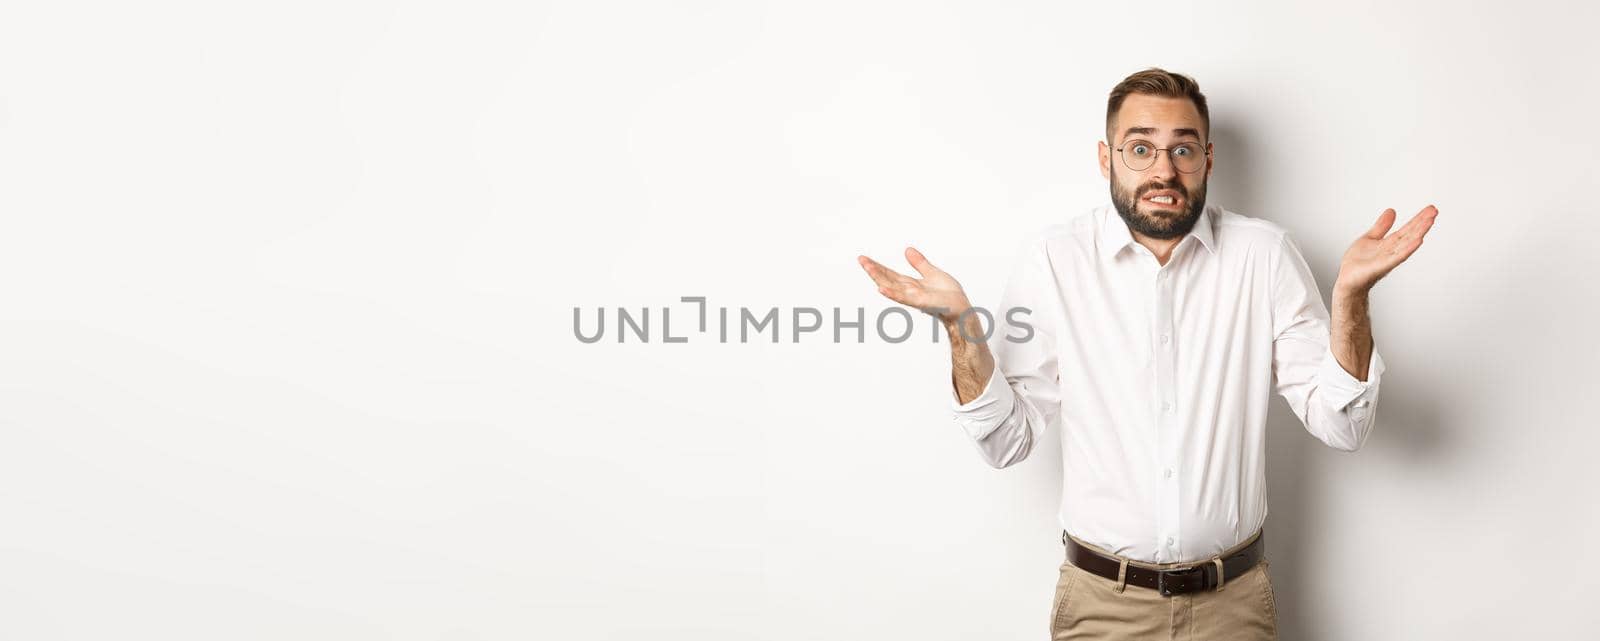 Clueless worried manager shrugging, looking confused, standing over white background.